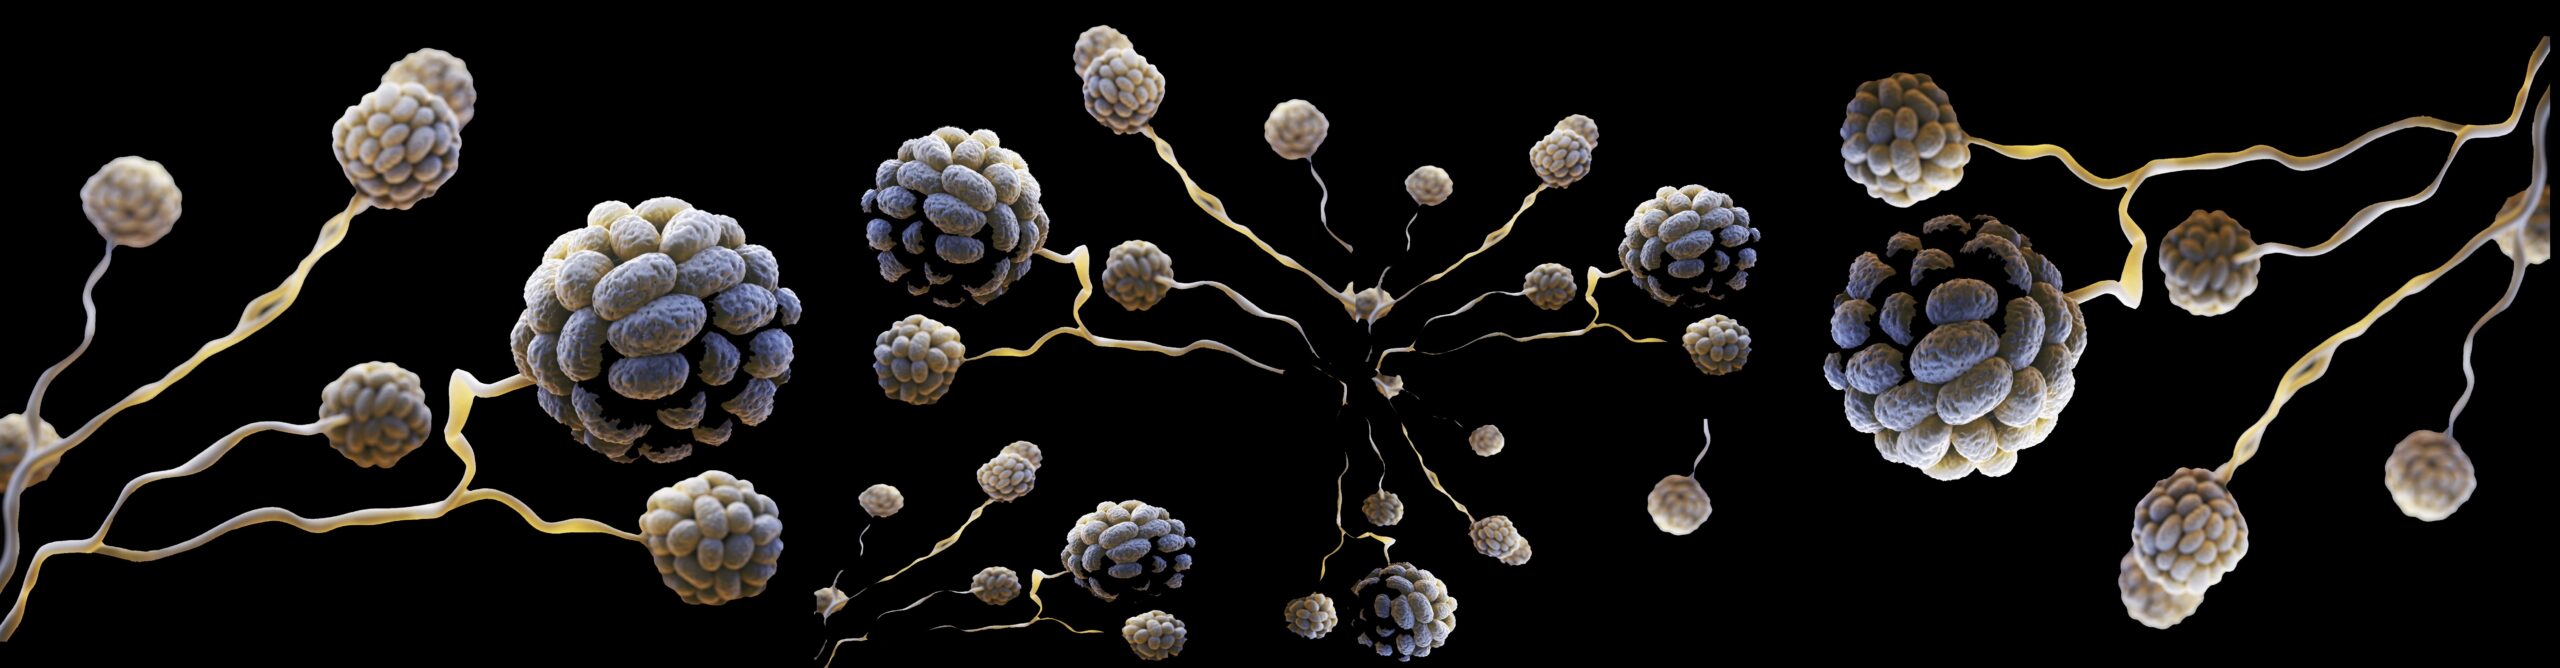 Digital graphic of a collection of stylized, branching neuron-like structures with clusters appearing as interconnected nodes, set against a black background, symbolizing the process of water damage restoration at the microscopic level.